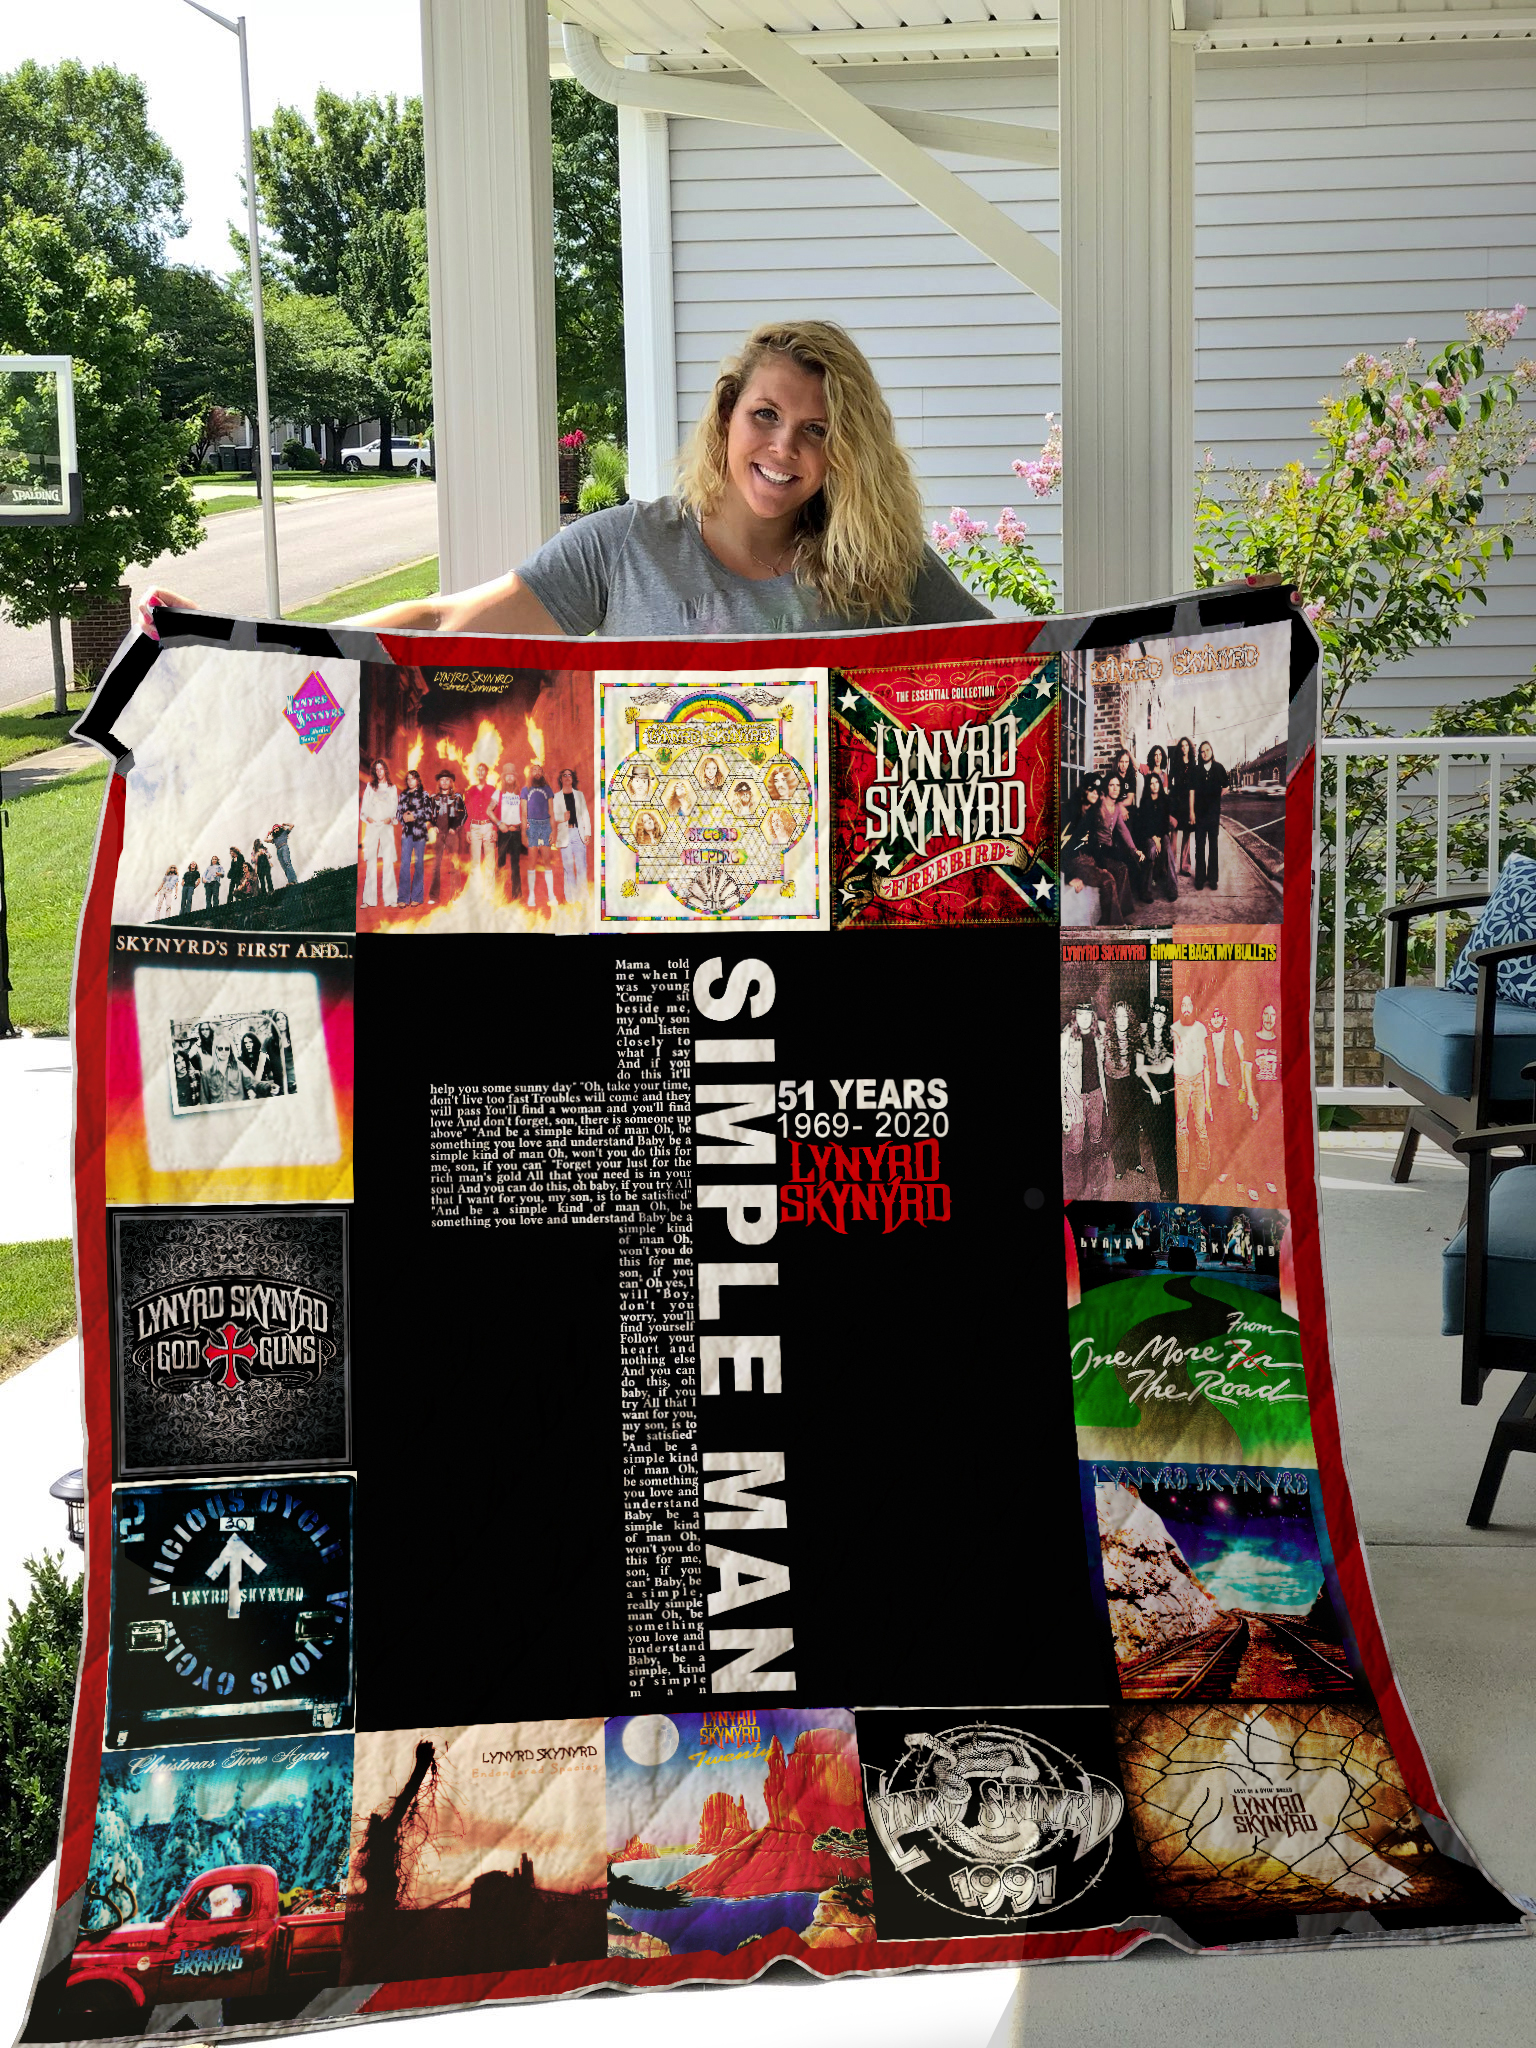 Details about   Lynyrd Skynyrd Best Gift Quilt Blanket Decor Home Full Size 